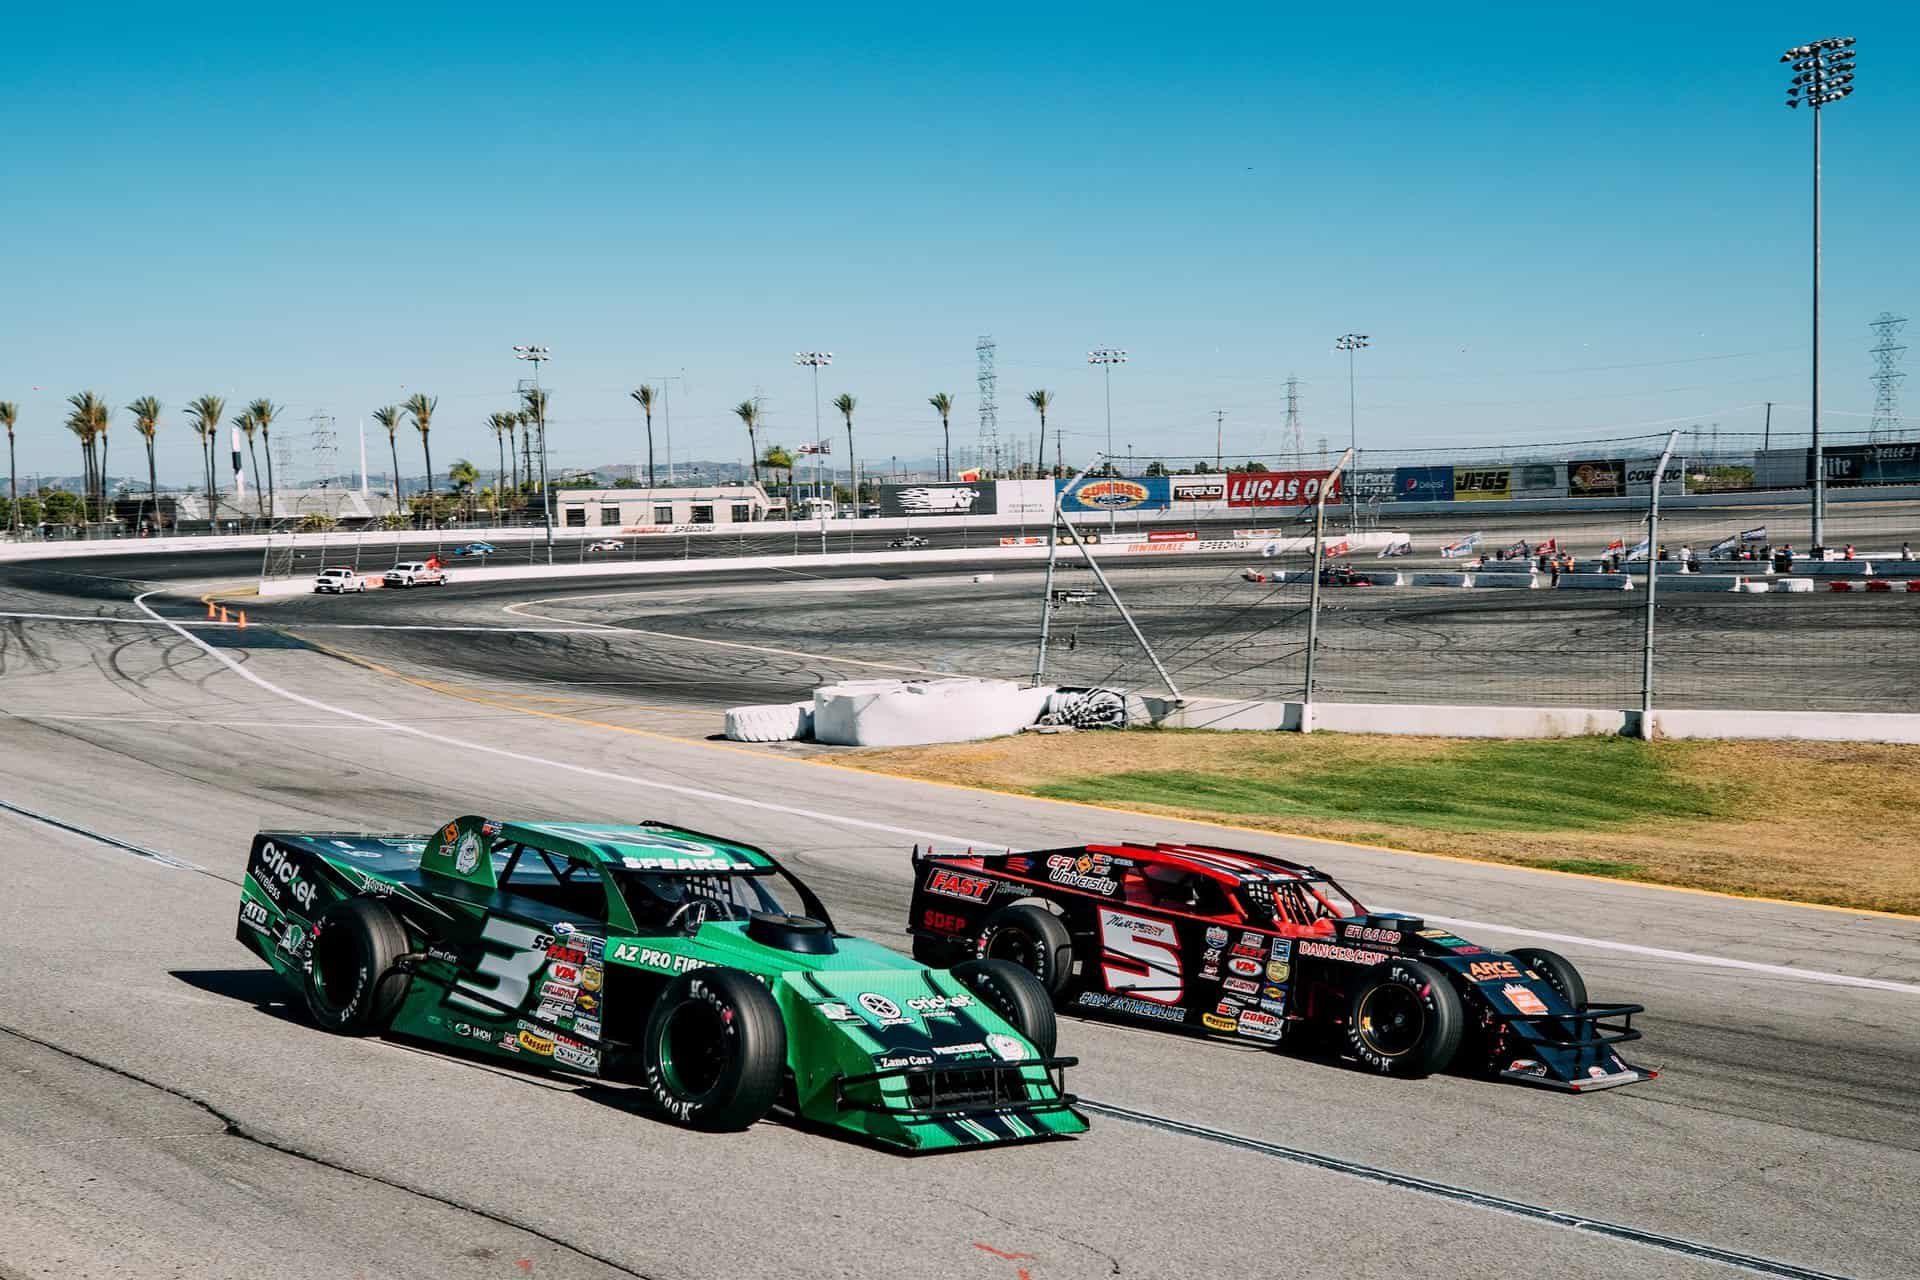 Matt Perry (5) races to the inside of Austin Stewart (3) at Irwindale Speedway in the K&N Filters 60 presented by Traffic Management Inc. on July 18, 2020.